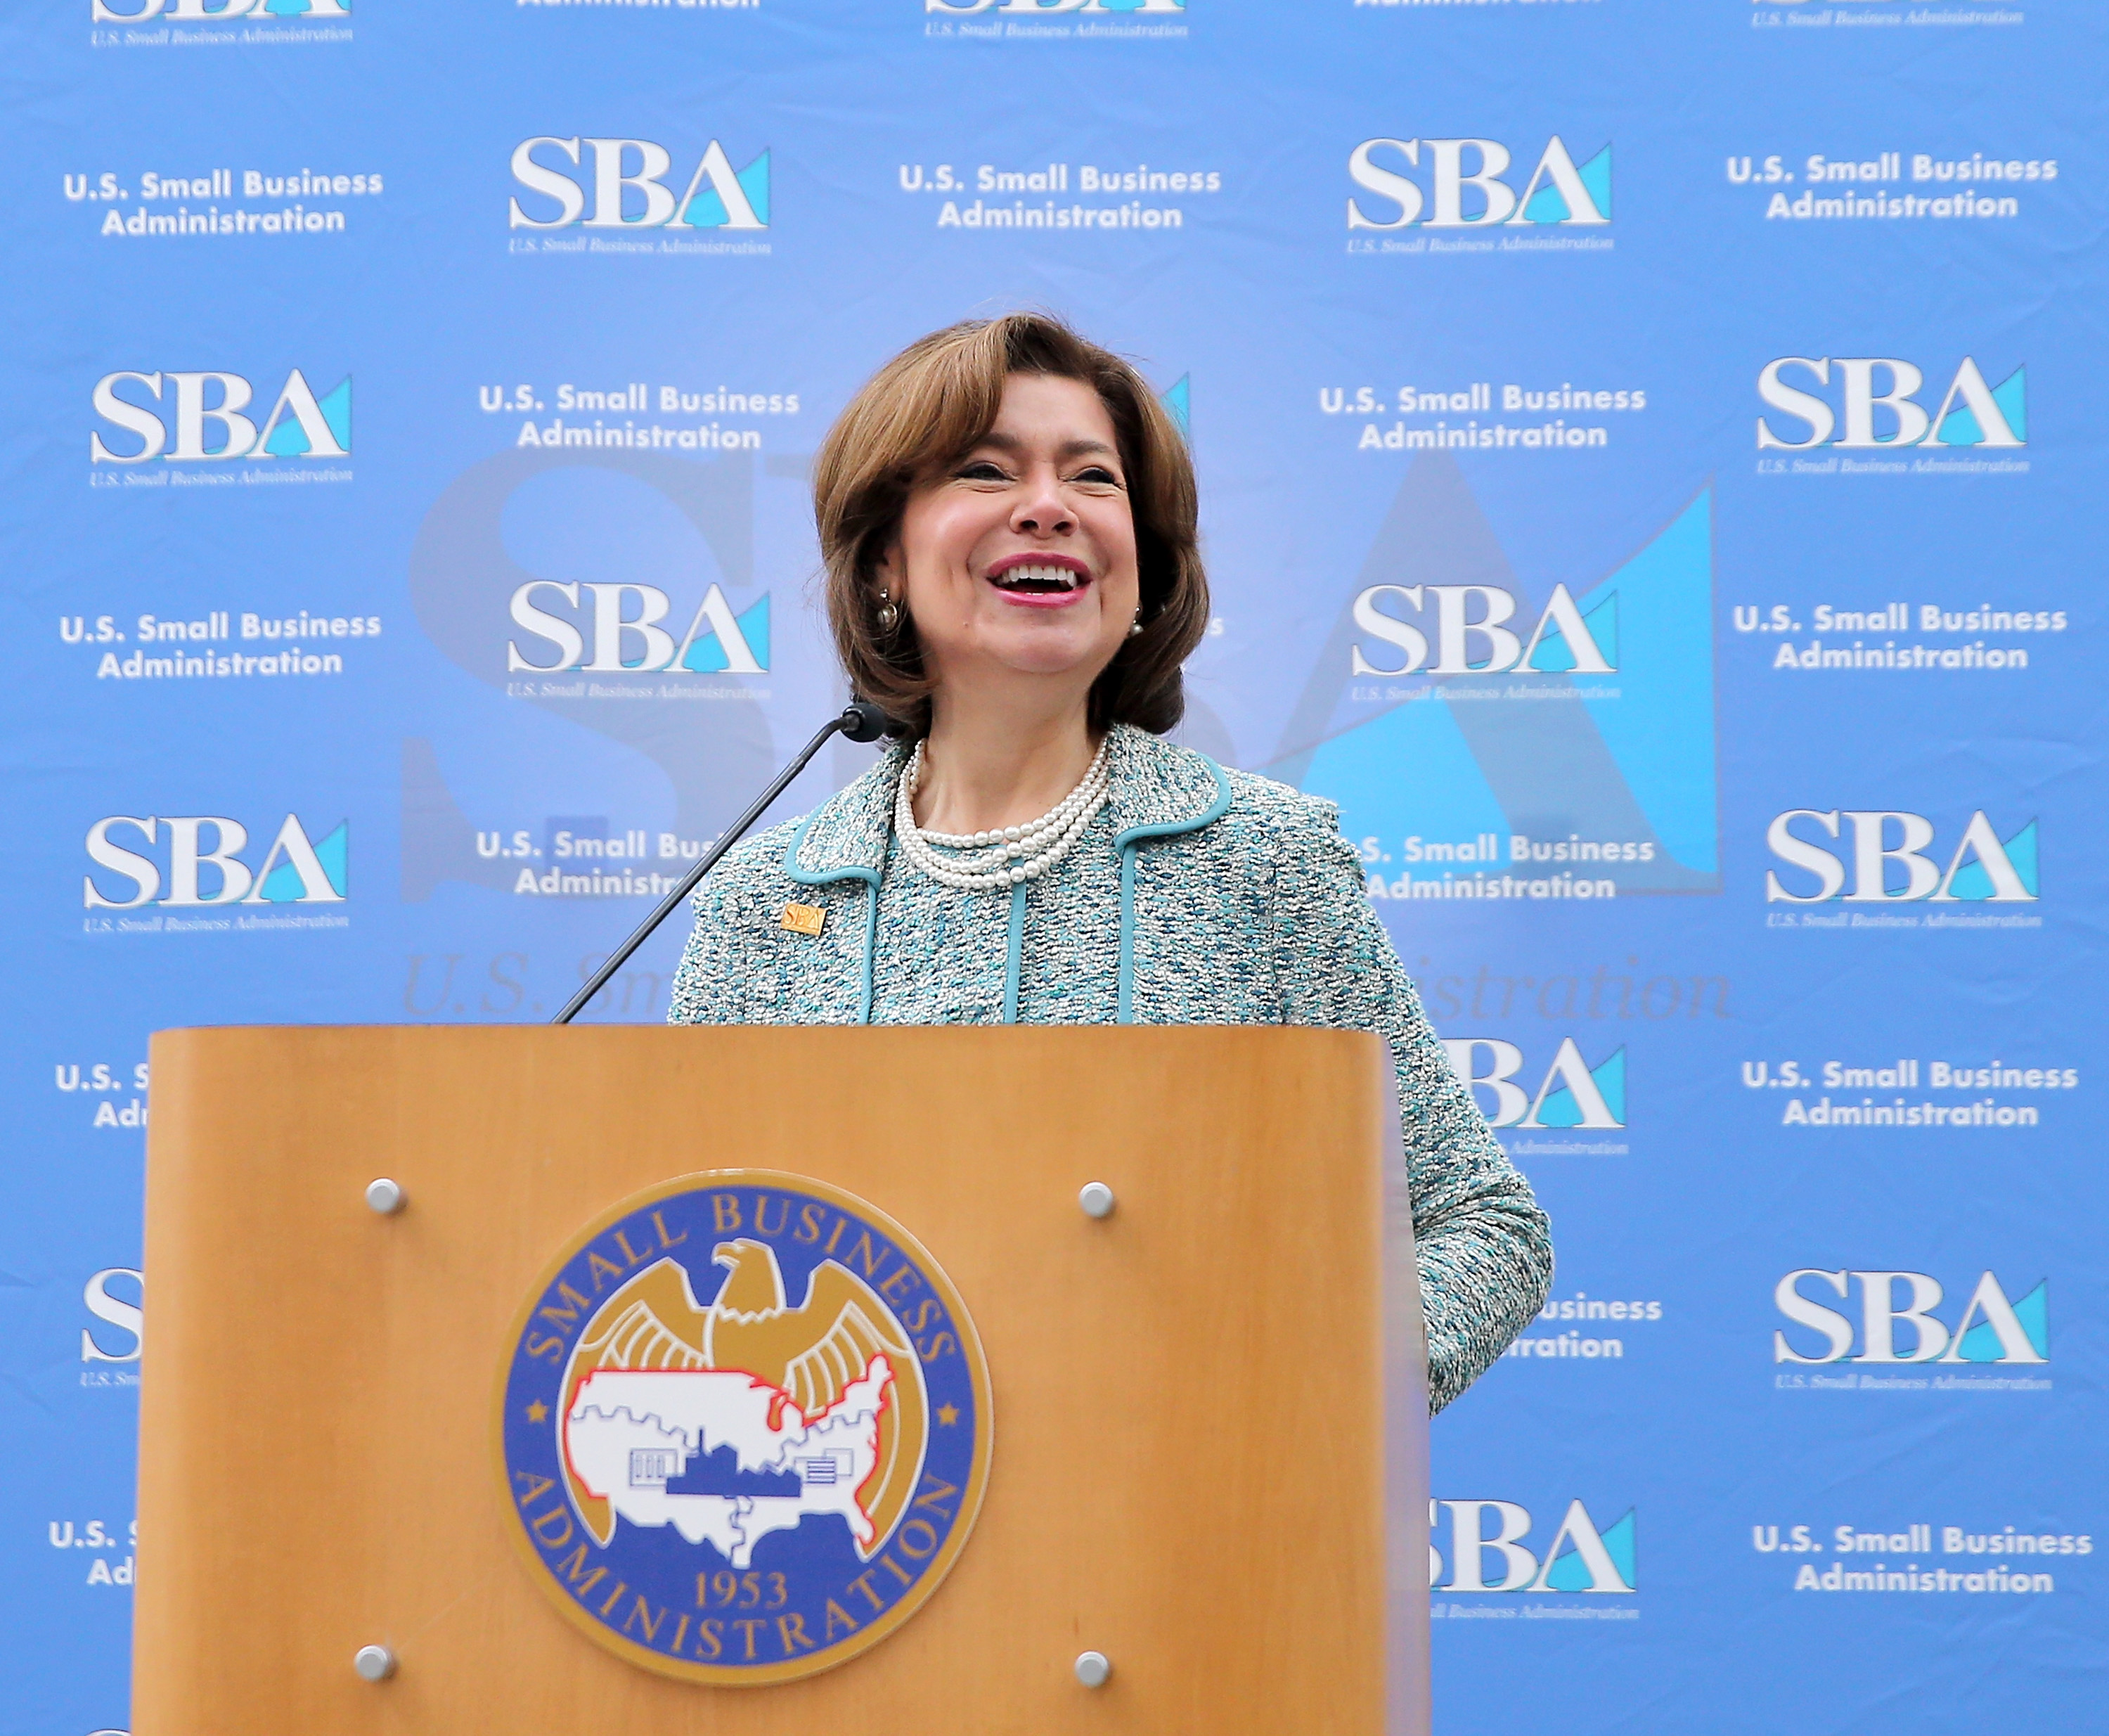 Maria Contreras-Sweet during National Small Business Week in San Jose, Calif. on May 6, 2016. (J. Countess—Getty Images/SBA)